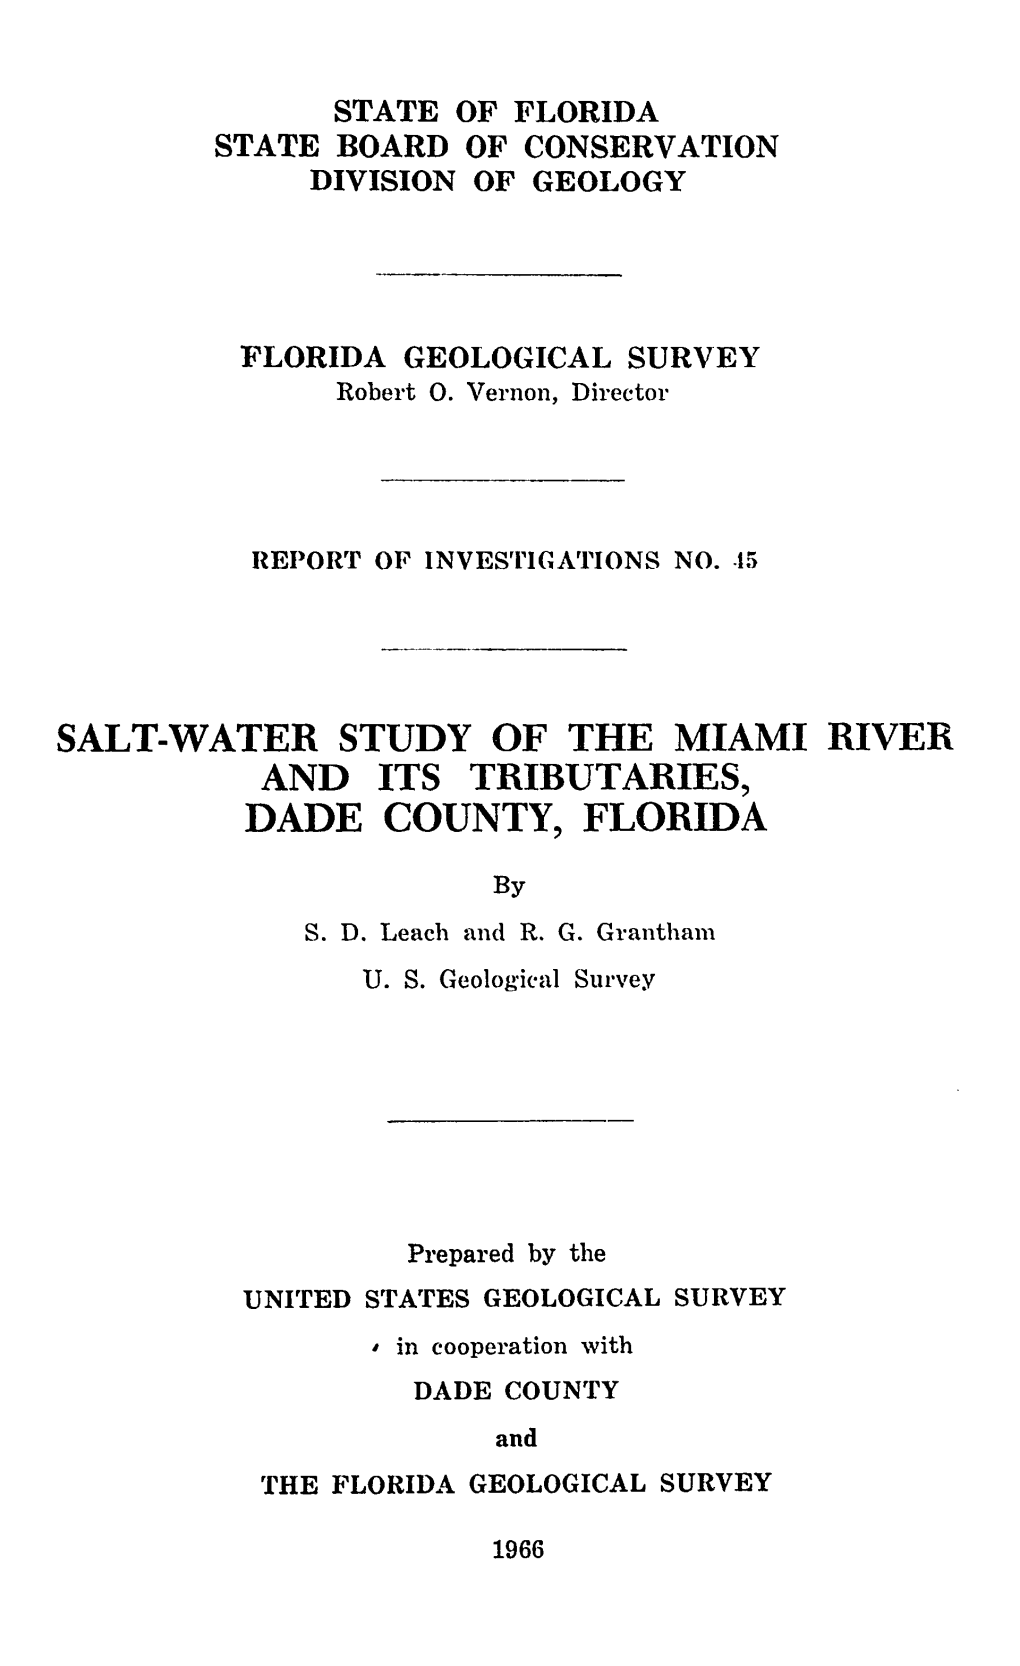 Salt-Water Study of the Miami River Dade County, Florida